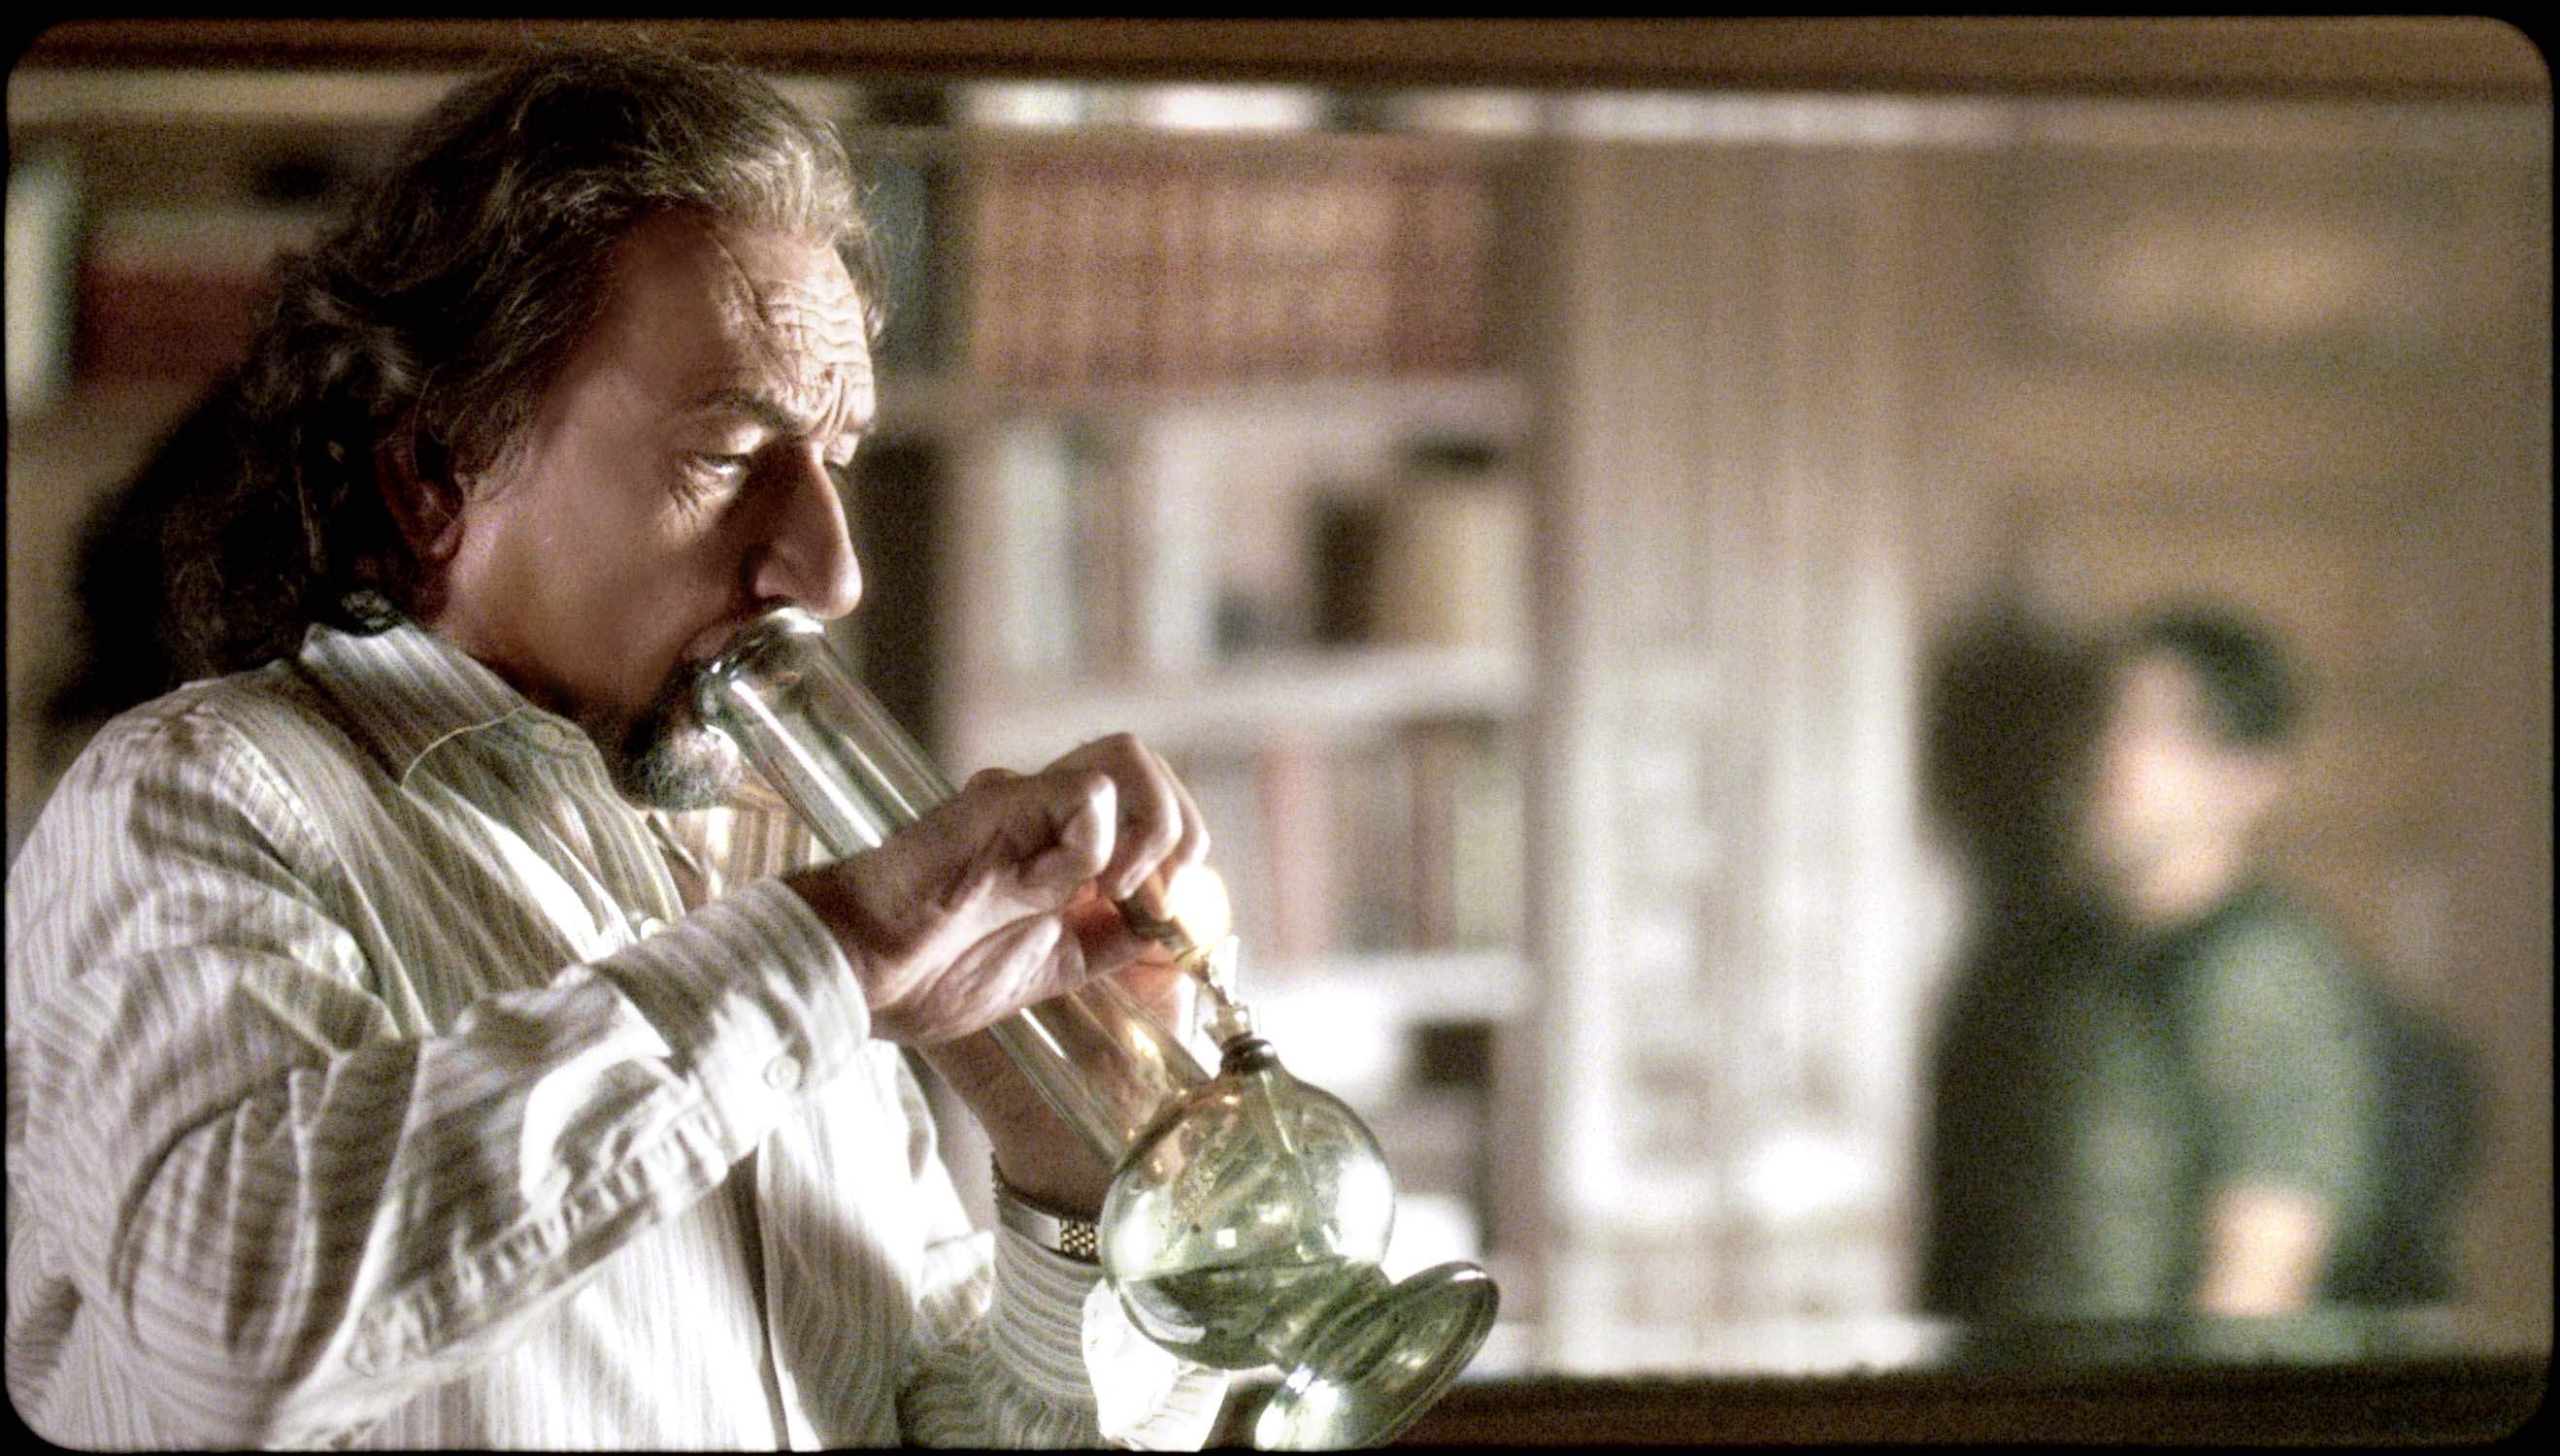 Ben Kingsley as Dr. Squires in Sony Pictures Classics' The Wackness (2008)